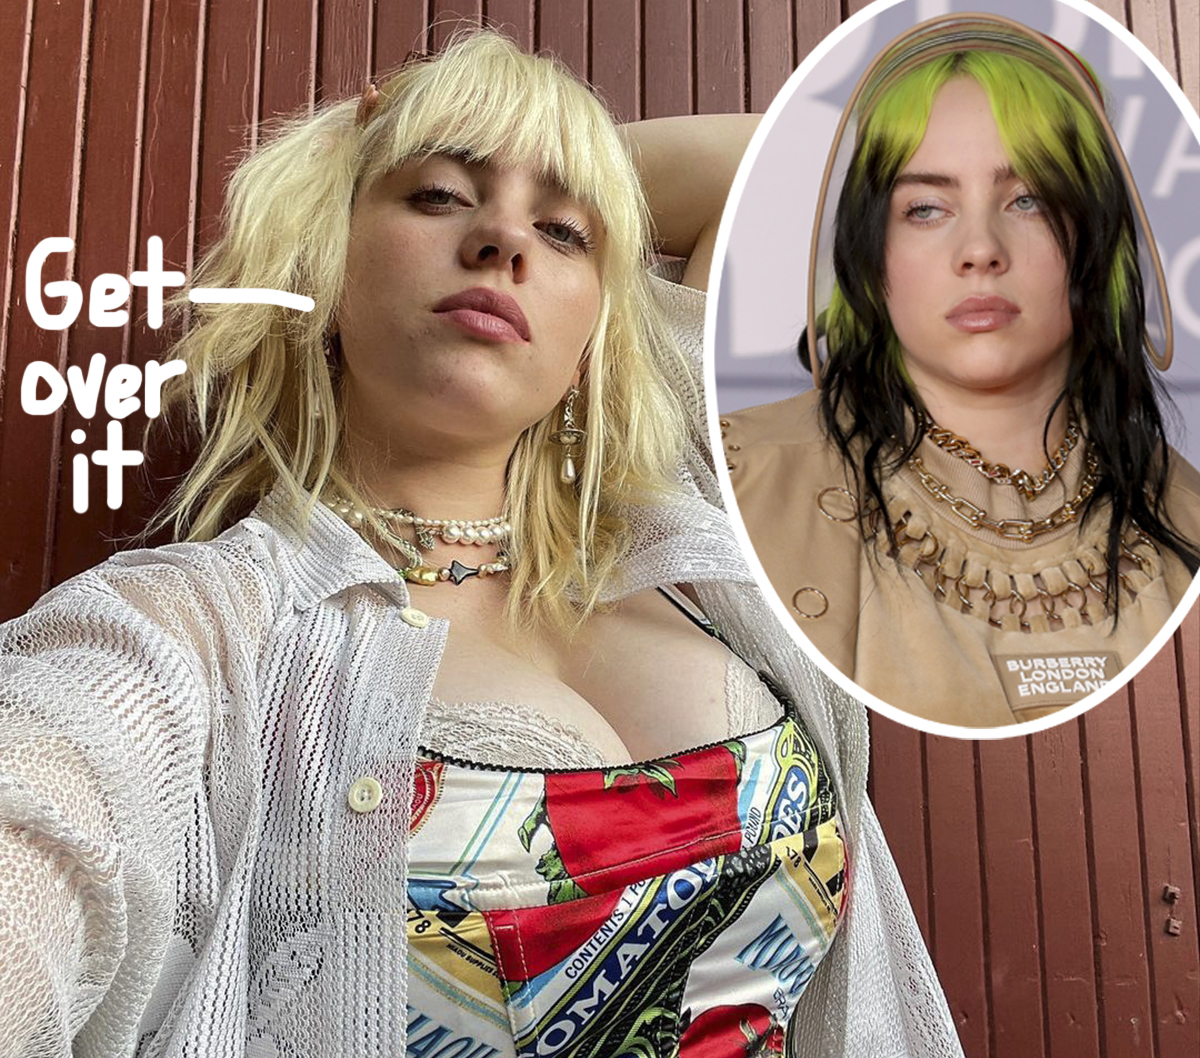 diana lumbreras recommends Does Billie Eilish Have Big Boobs